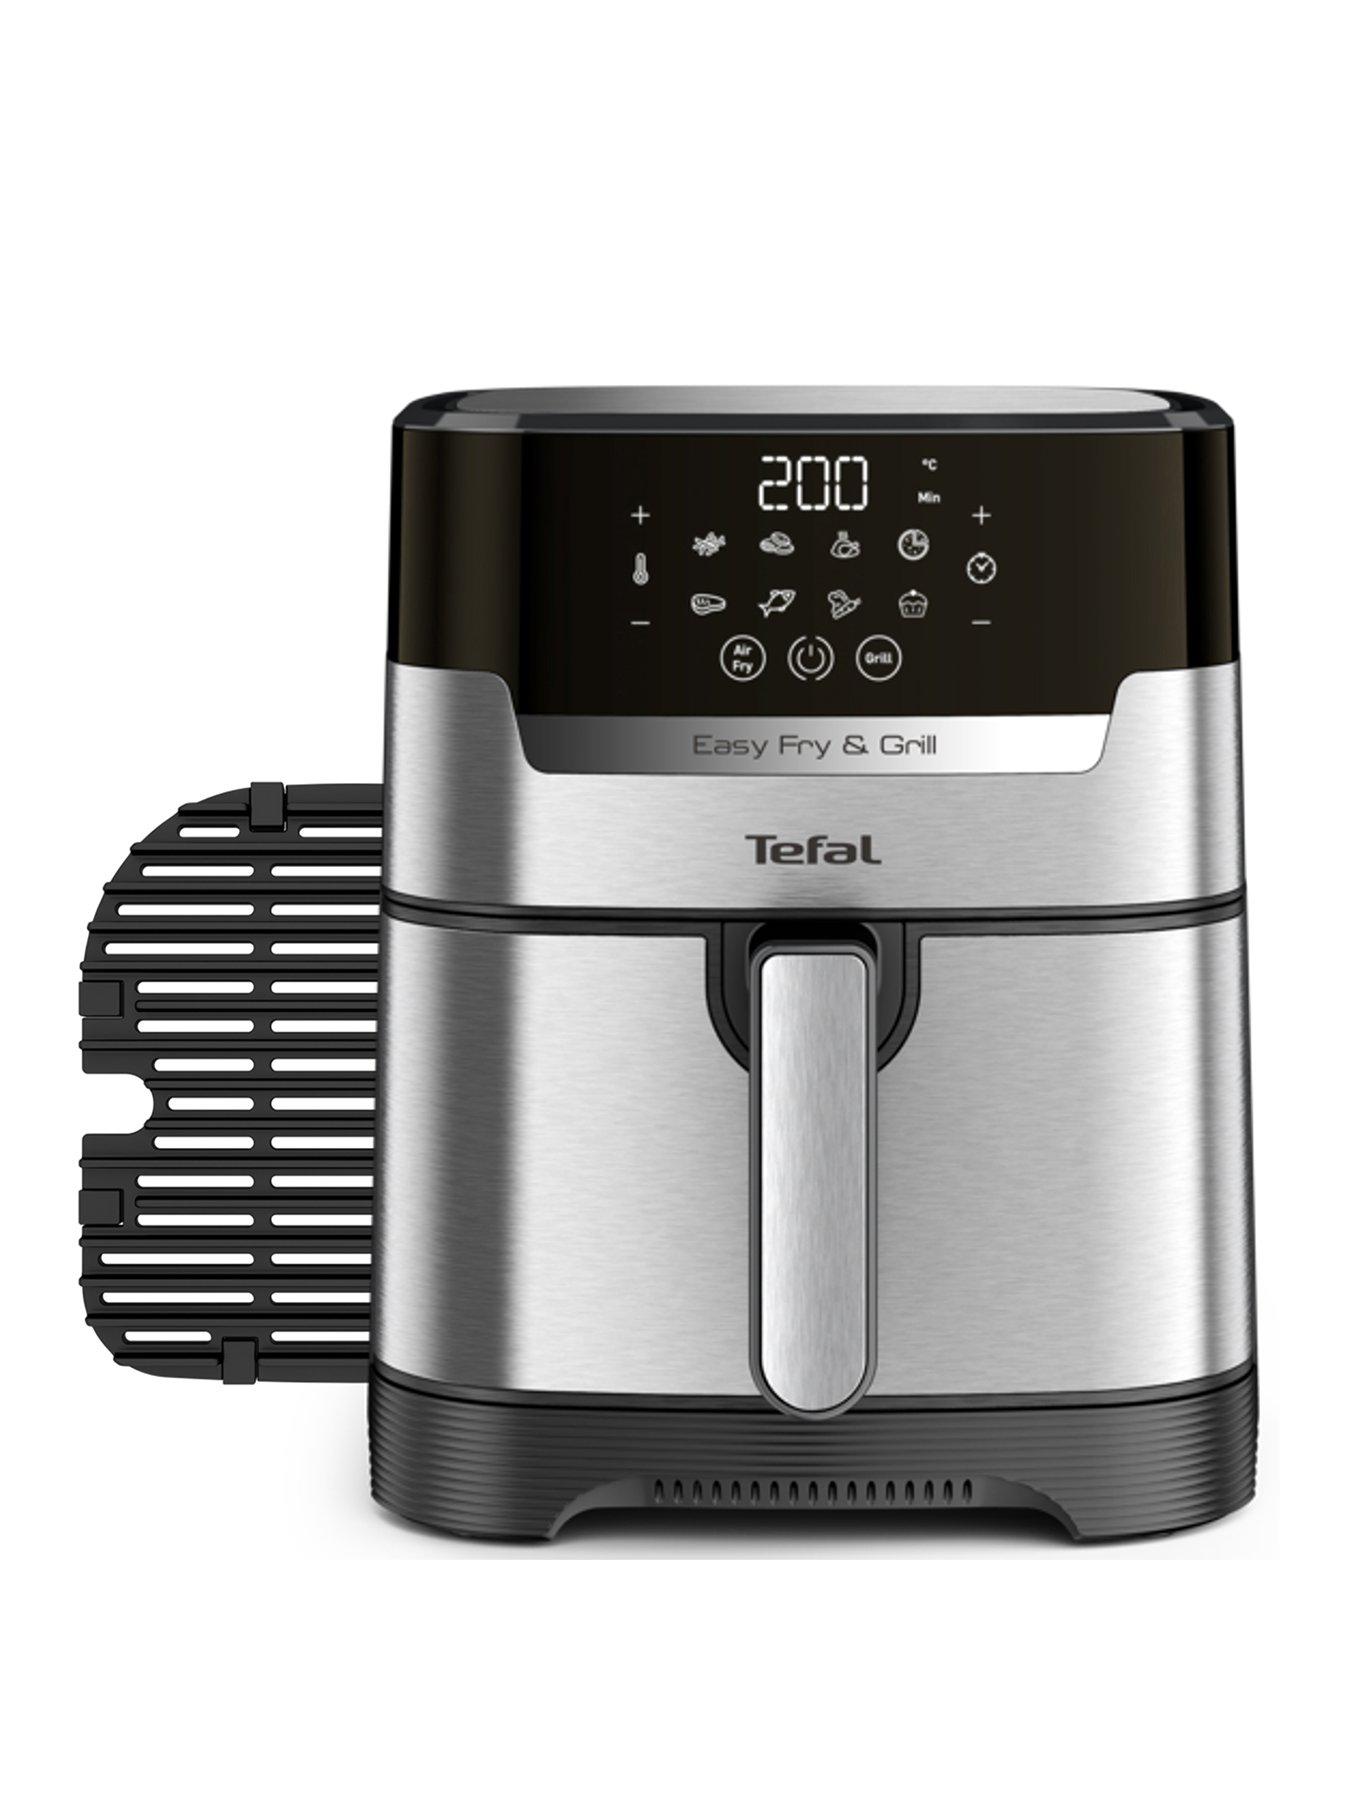 https://media.very.ie/i/littlewoodsireland/TMW7L_SQ1_0000000088_NO_COLOR_SLf/tefal-easy-fry-precision-2-in-1-digitalnbspair-fryer-amp-grill-with-8-in-1-programs-amp-2-cooking-functions-42l.jpg?$180x240_retinamobilex2$&$roundel_lwireland$&p3_img=video_roundel